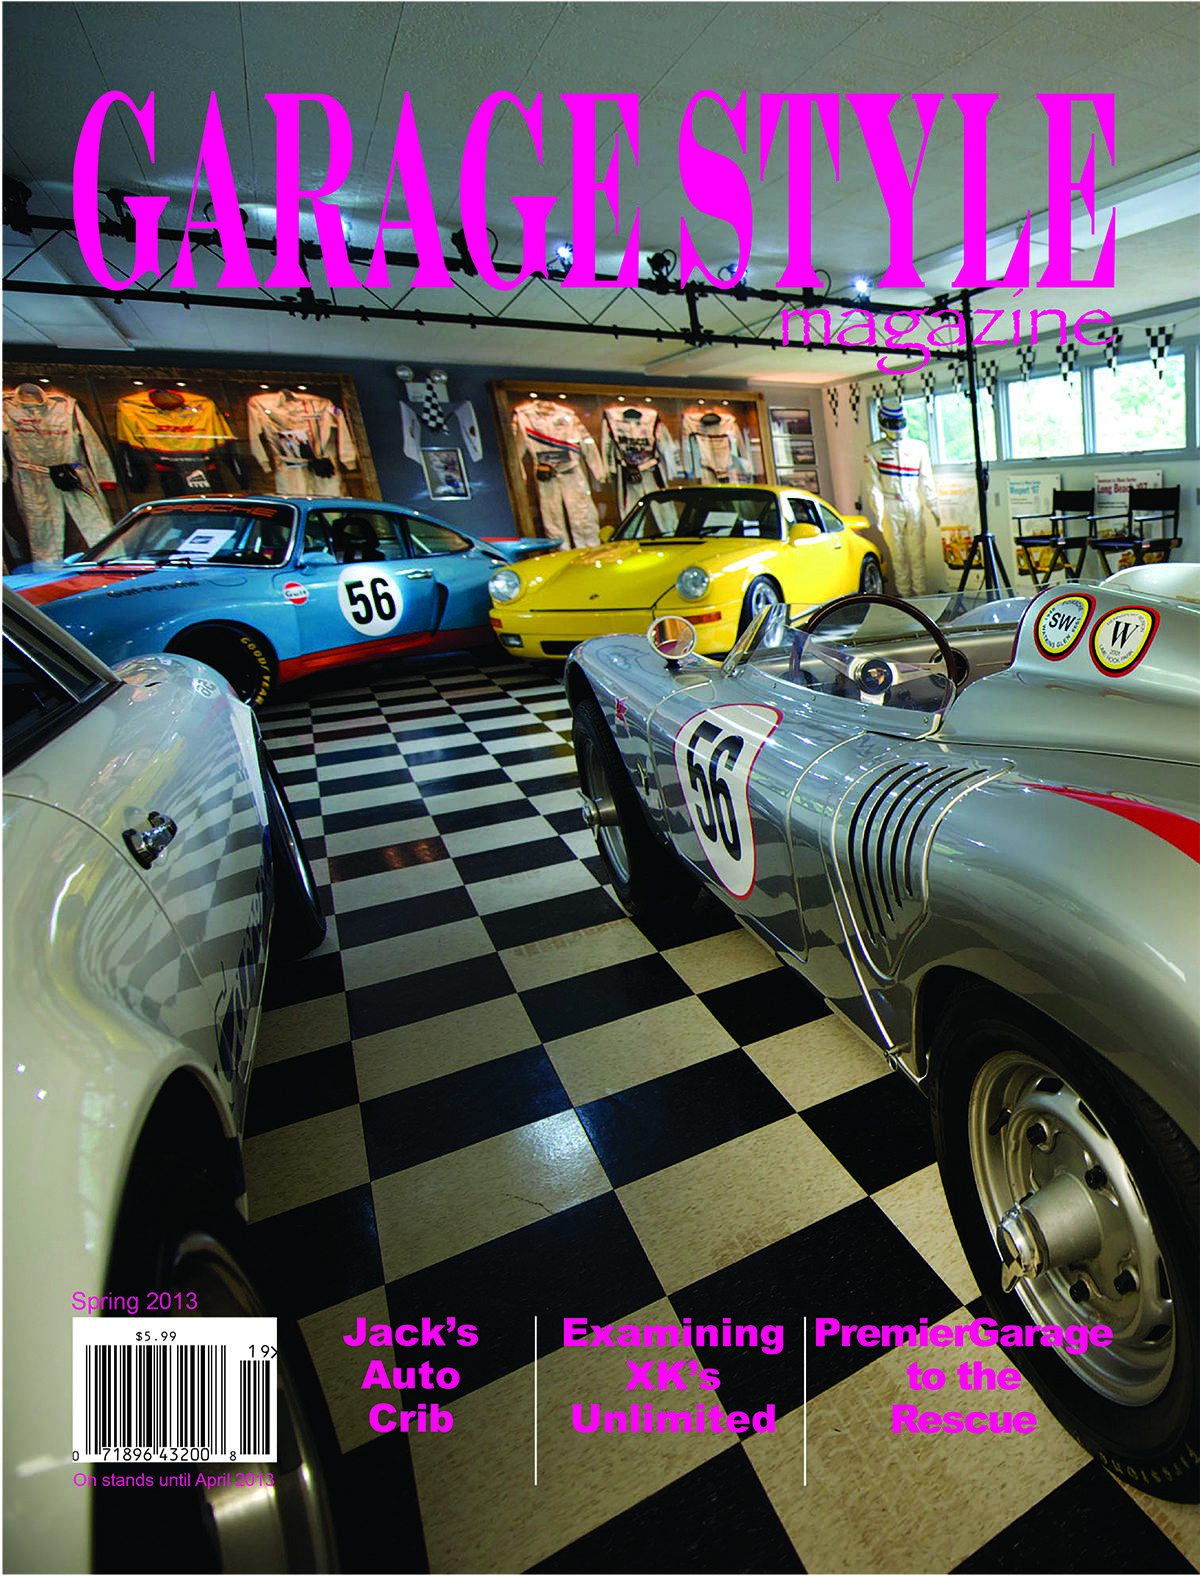 Issue 20, Cover